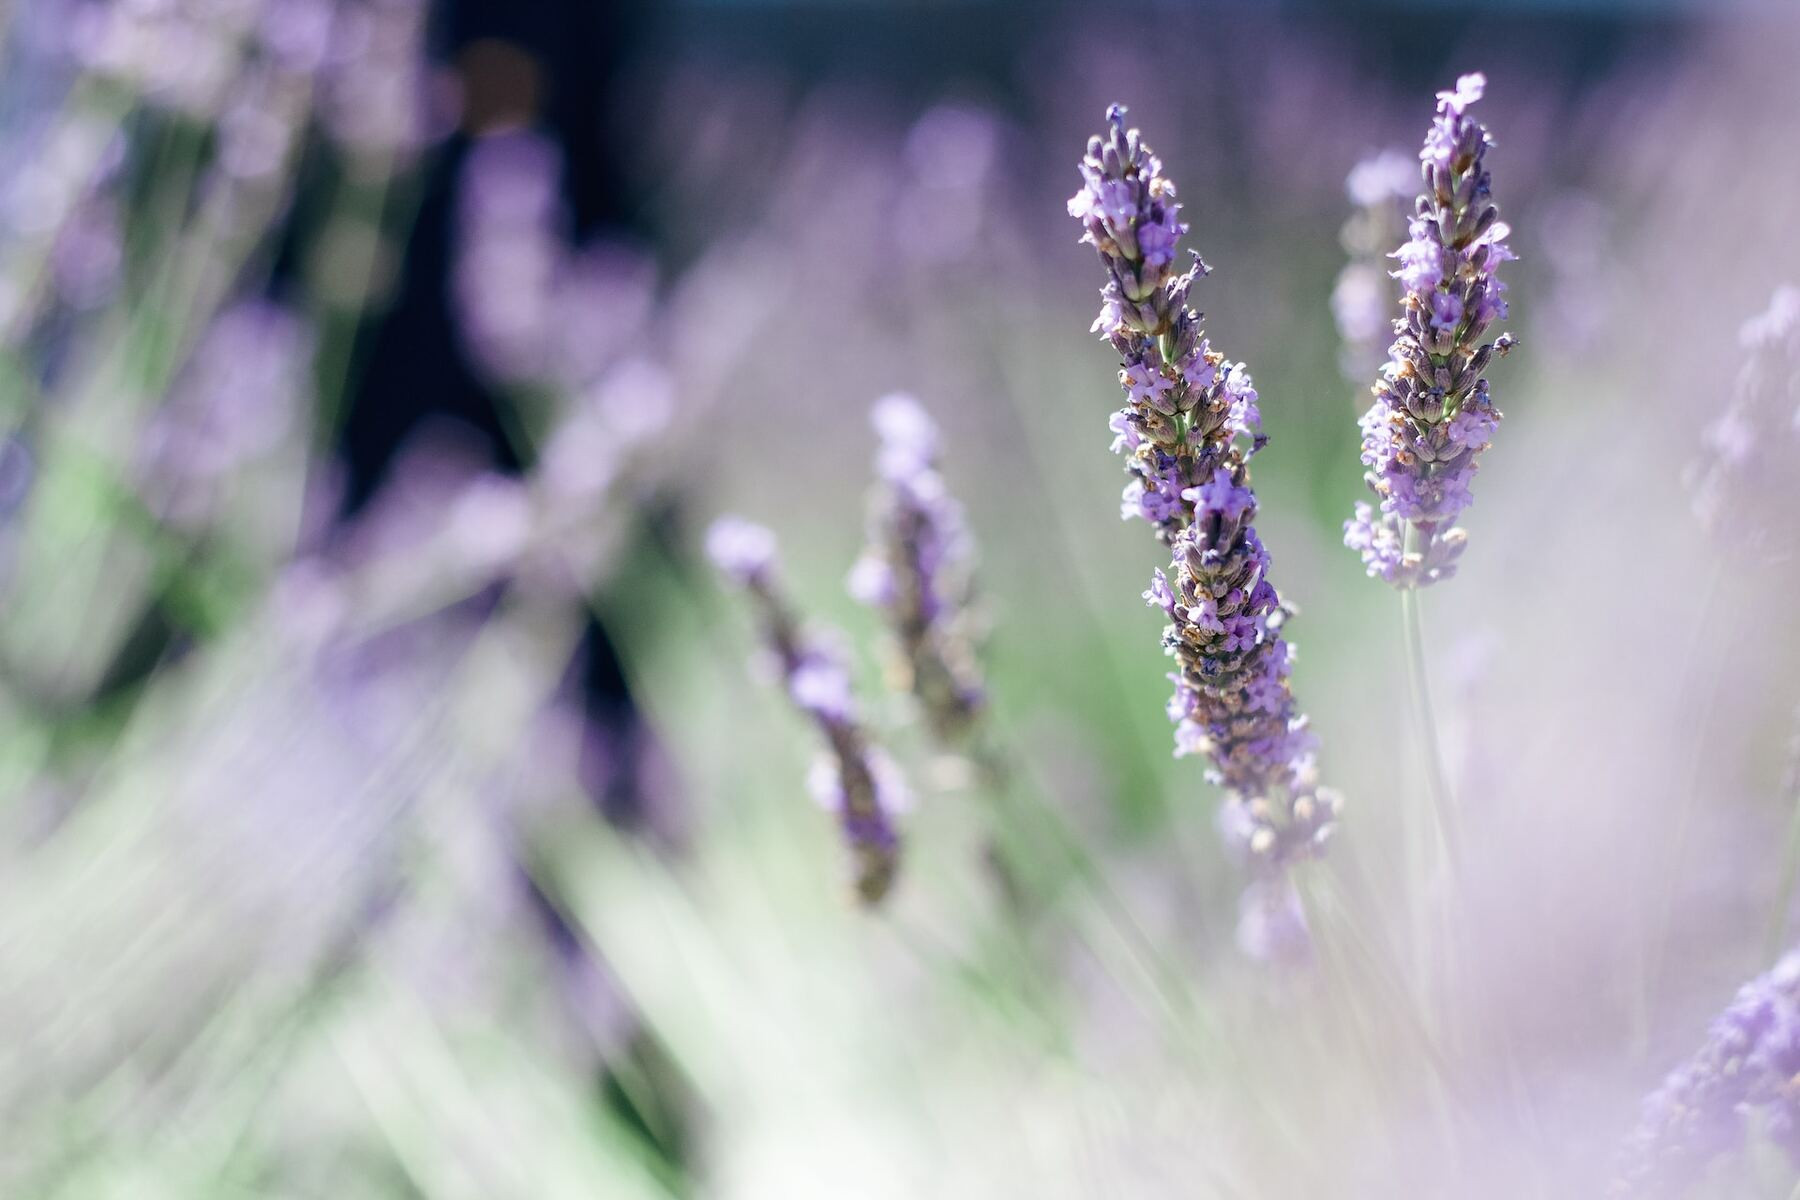 Lavender flowers growing as part of a field.